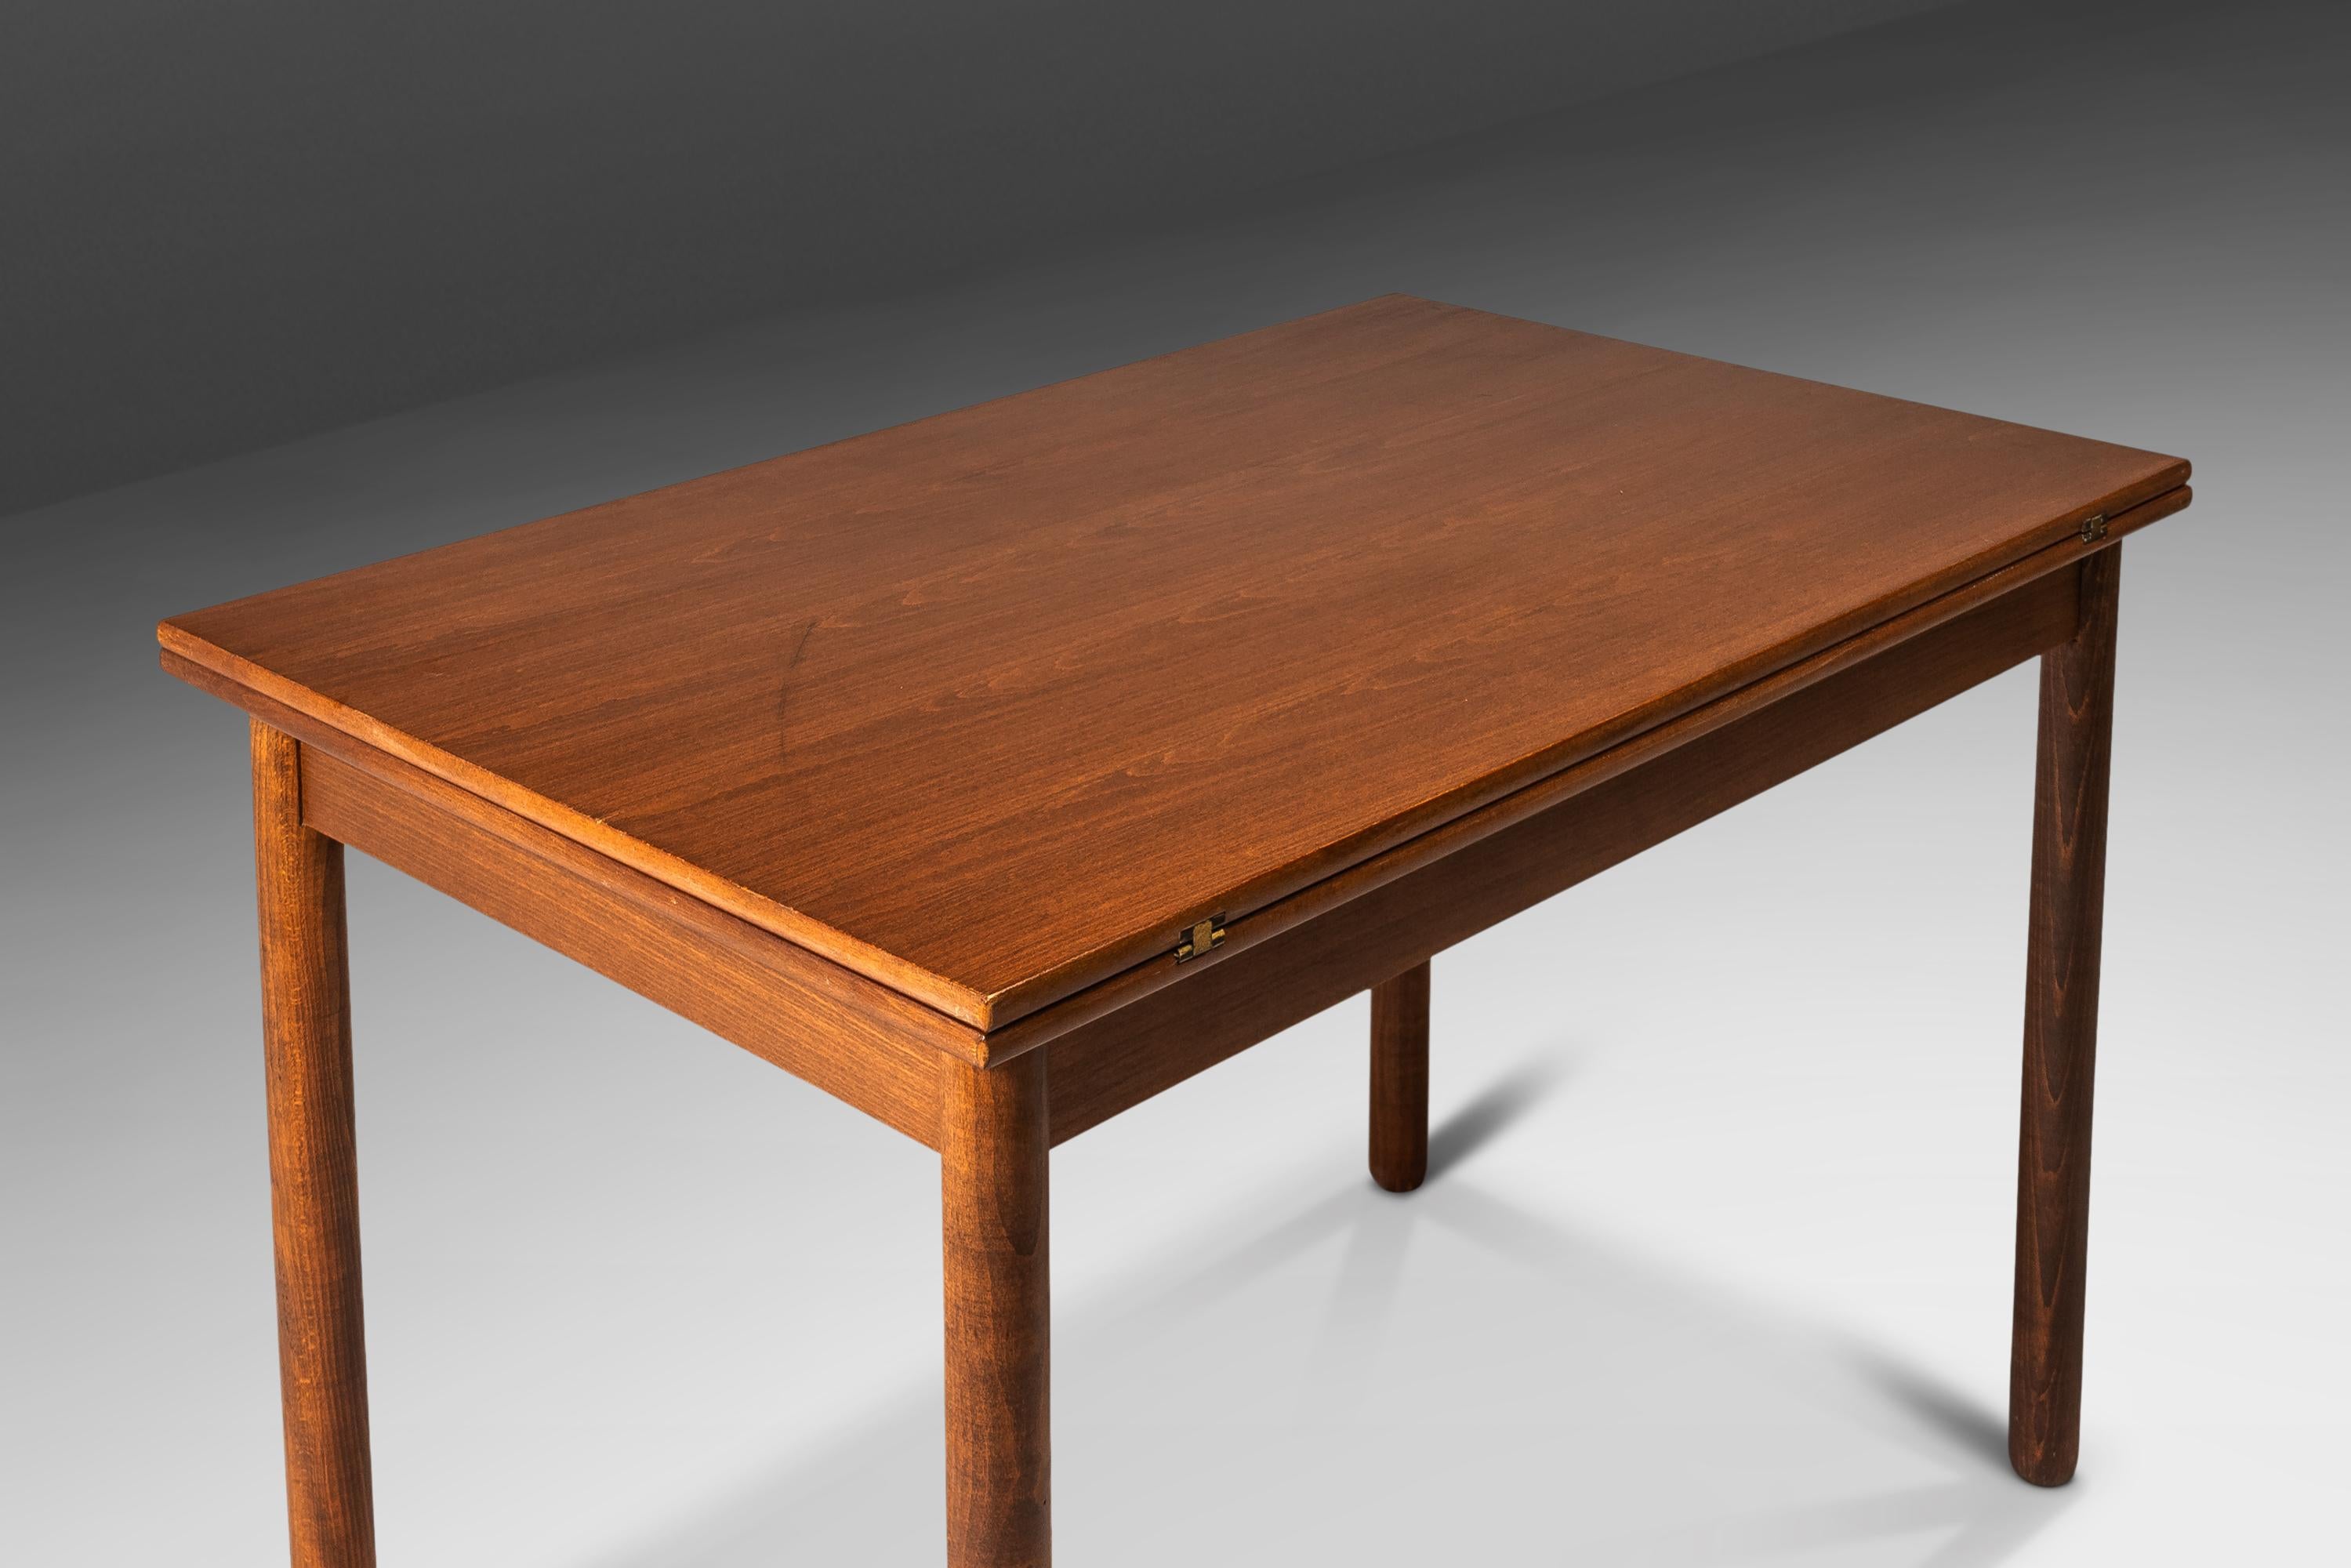 Mid-20th Century Walnut Extension Flip-Flap Dining Table, Folke Ohlsson Style, USA, c. 1960's For Sale